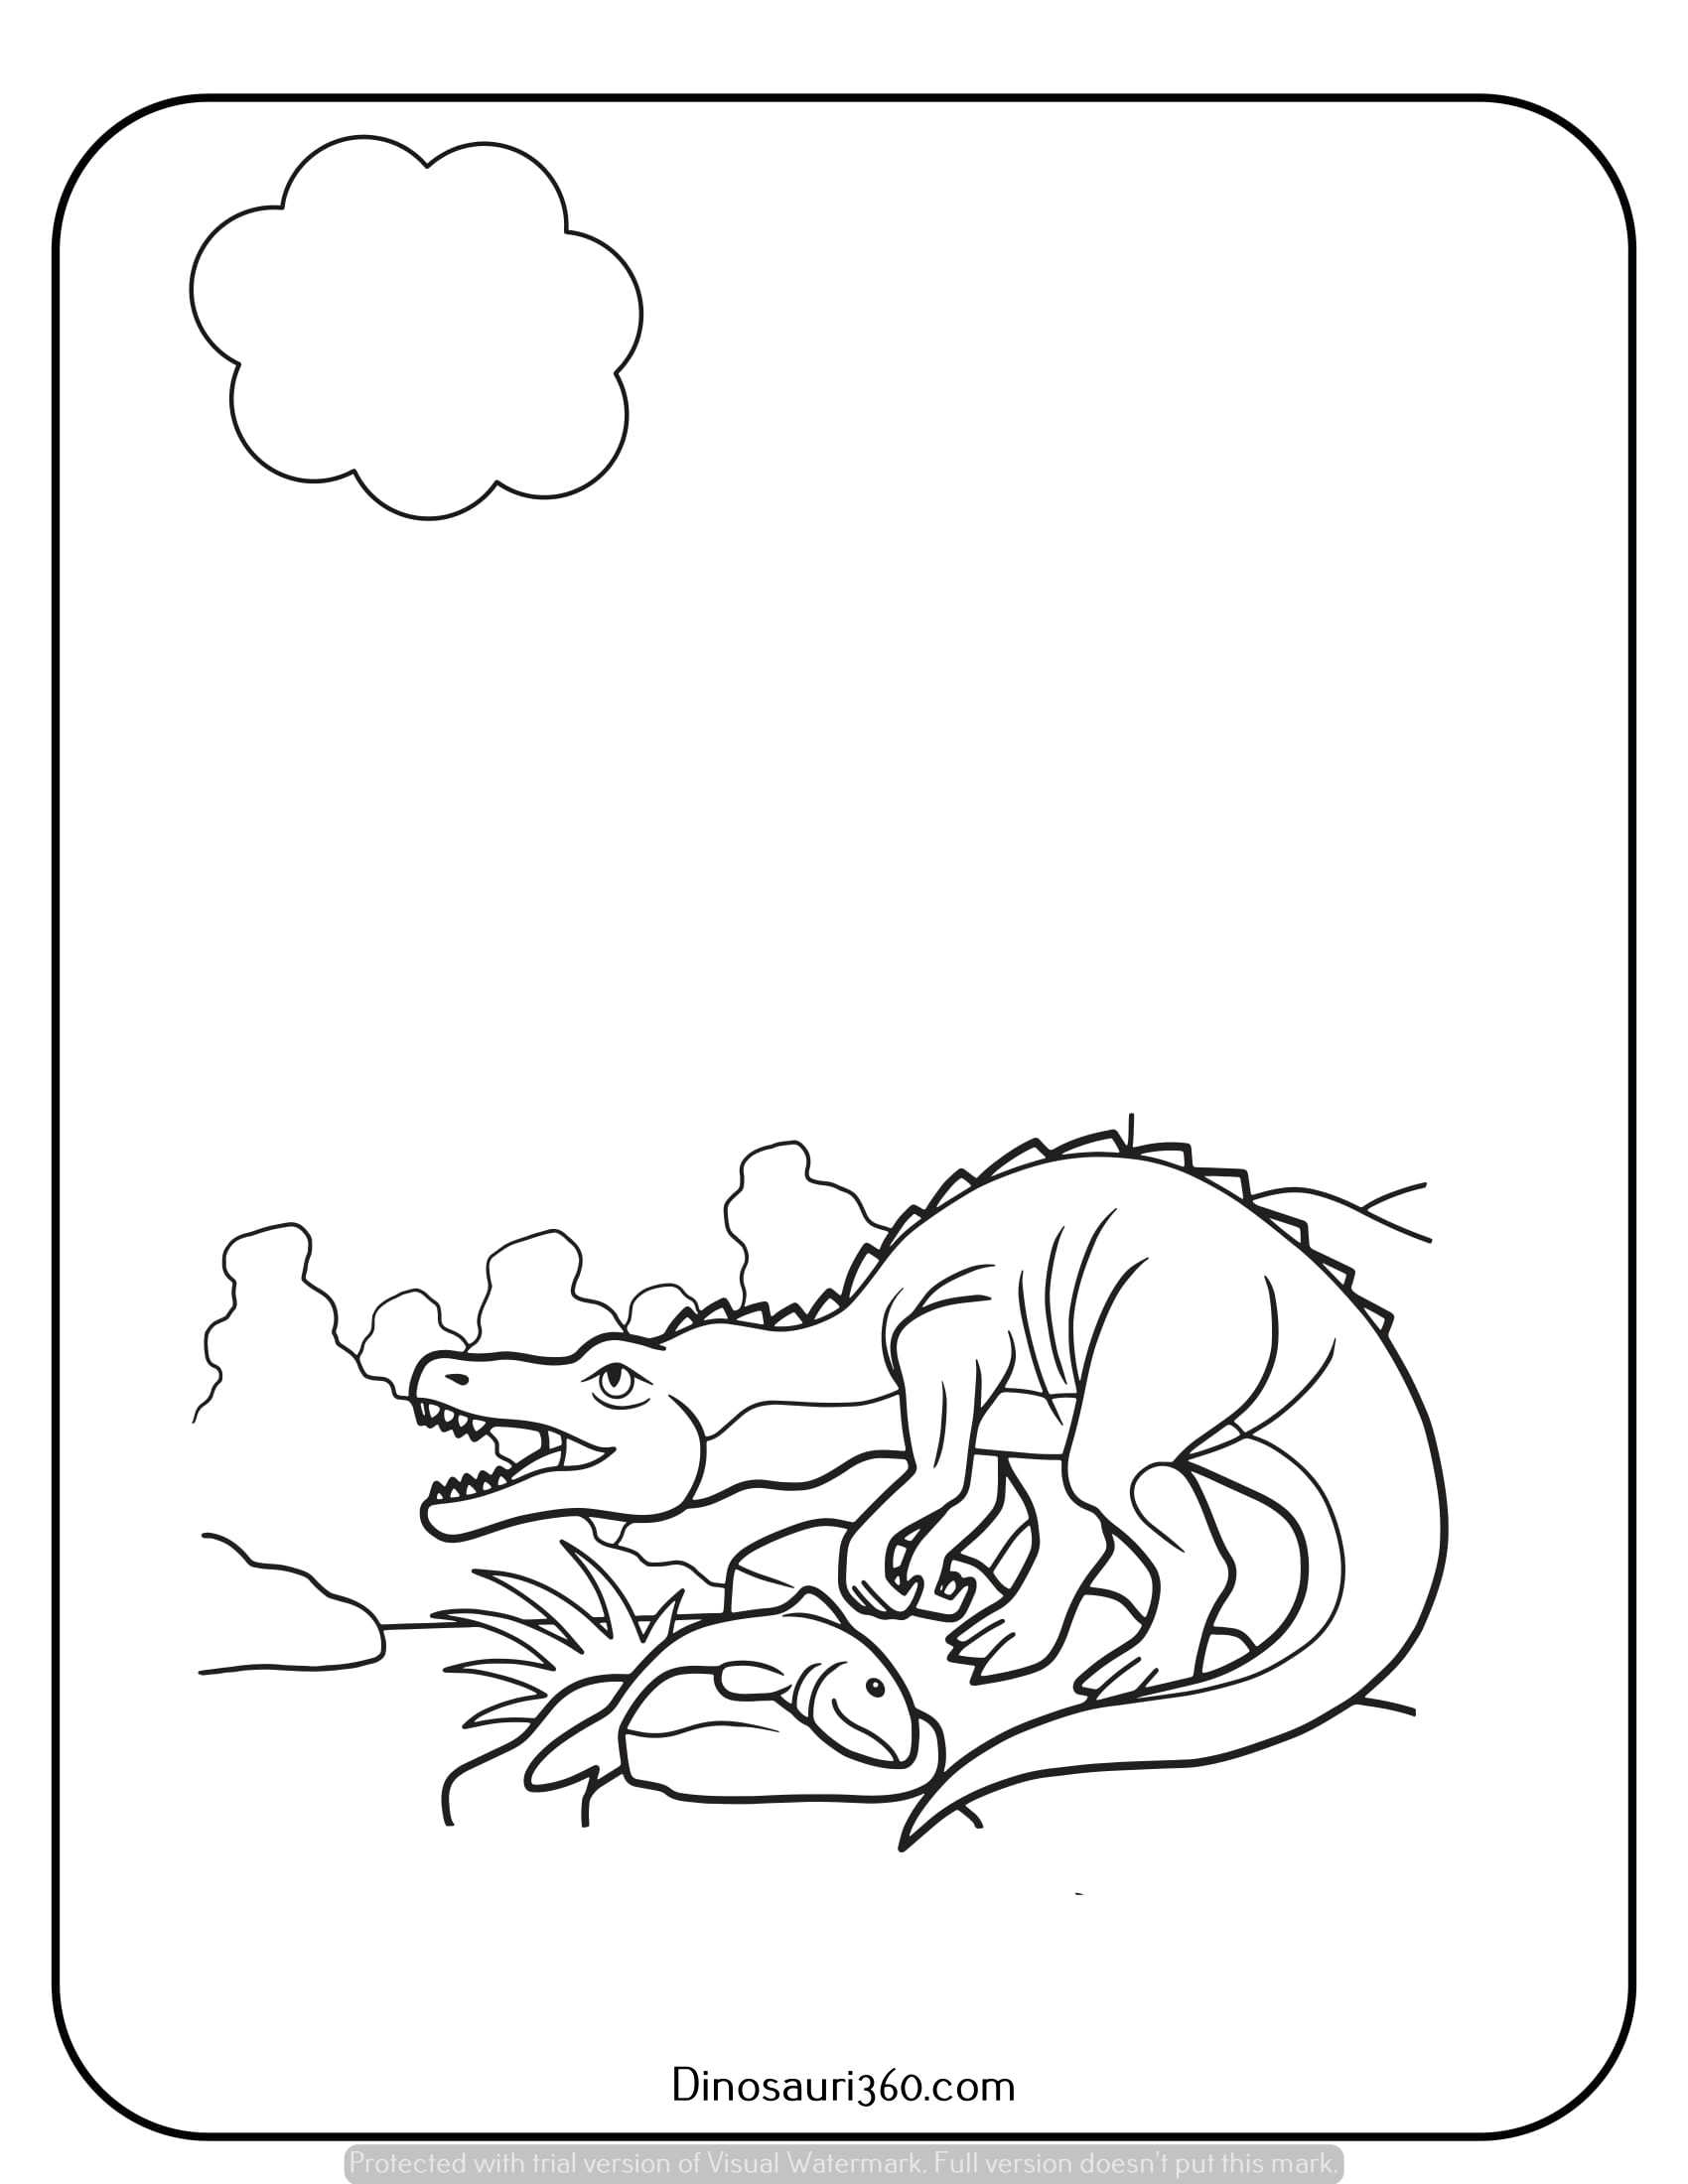 100-Dinosaur Coloring Pages (1)-3-1